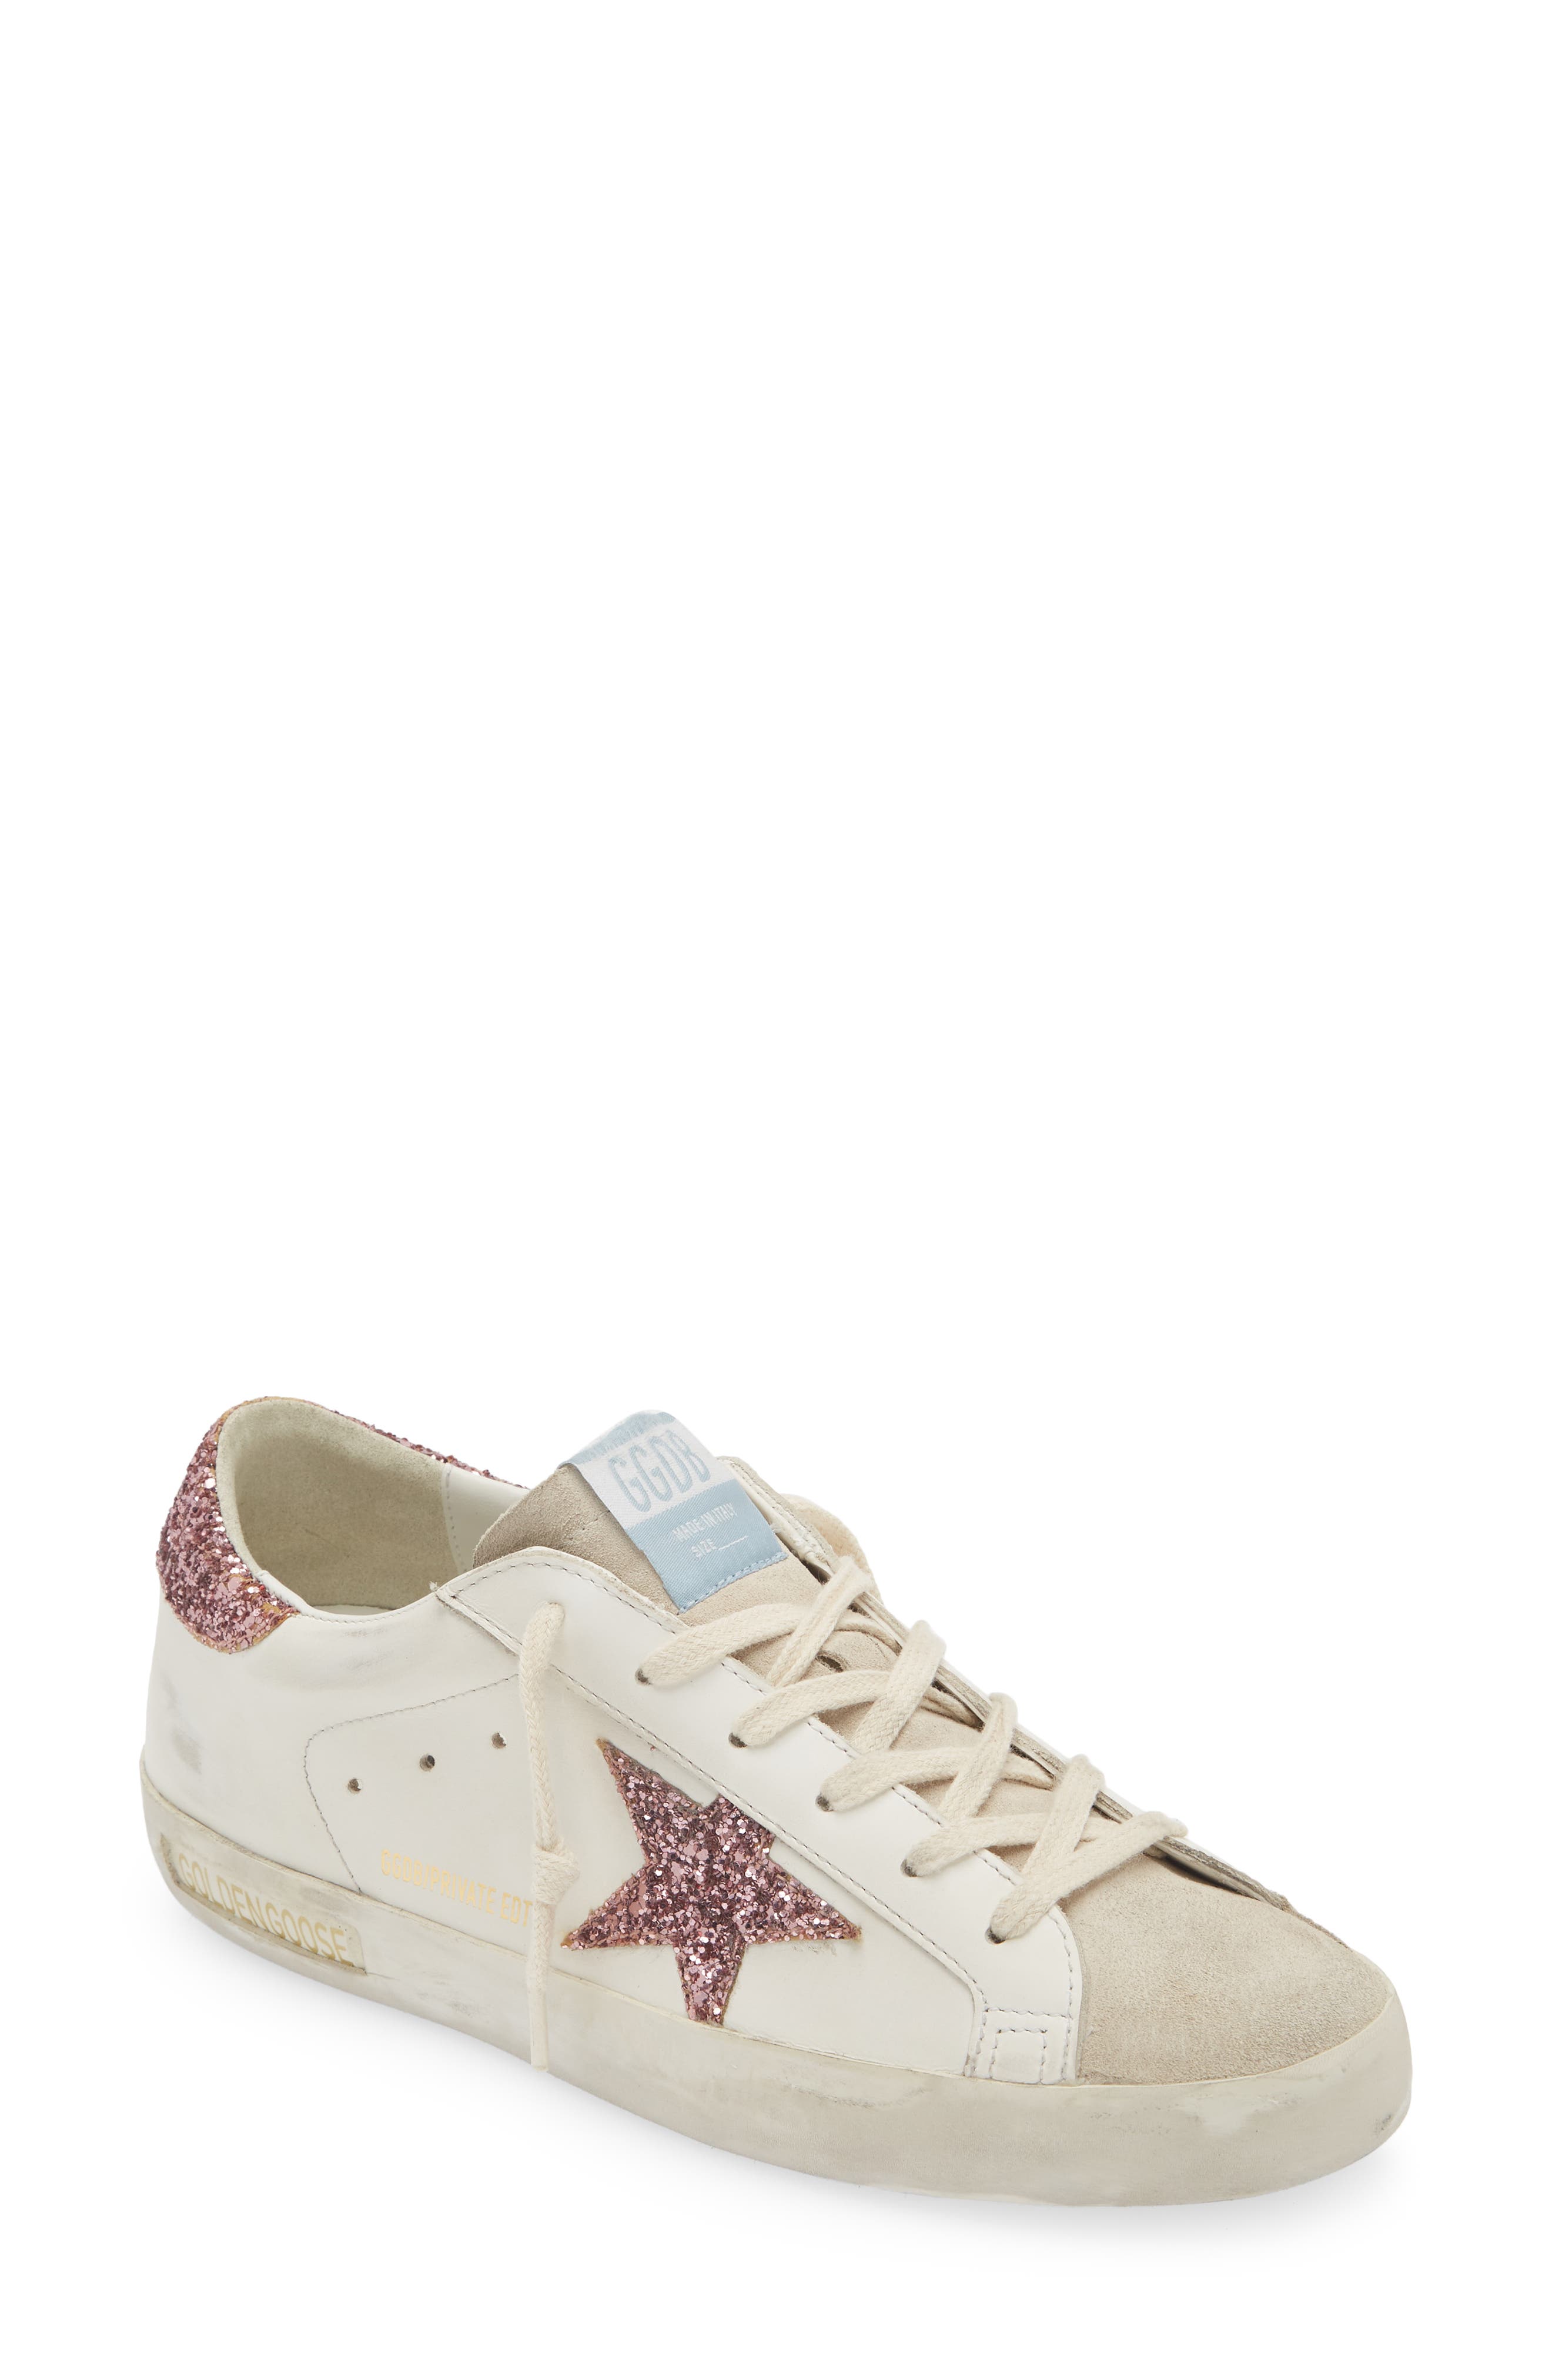 Golden Goose Super-Star White Royal Blue Grey Suede Patch (Women's)